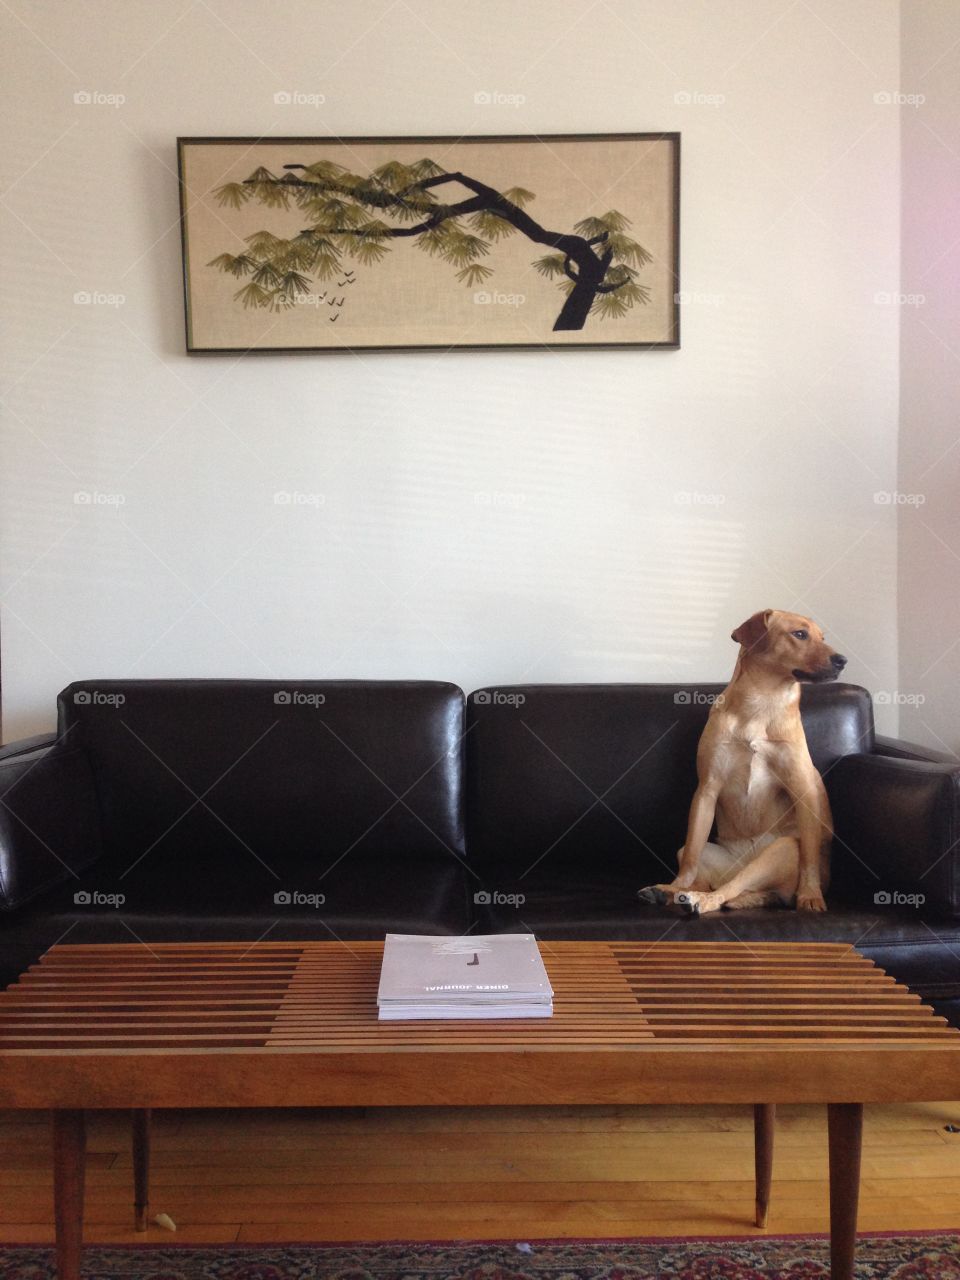 Dog sitting like a human on mid-century sofa with Japanese artwork and mid century coffee table